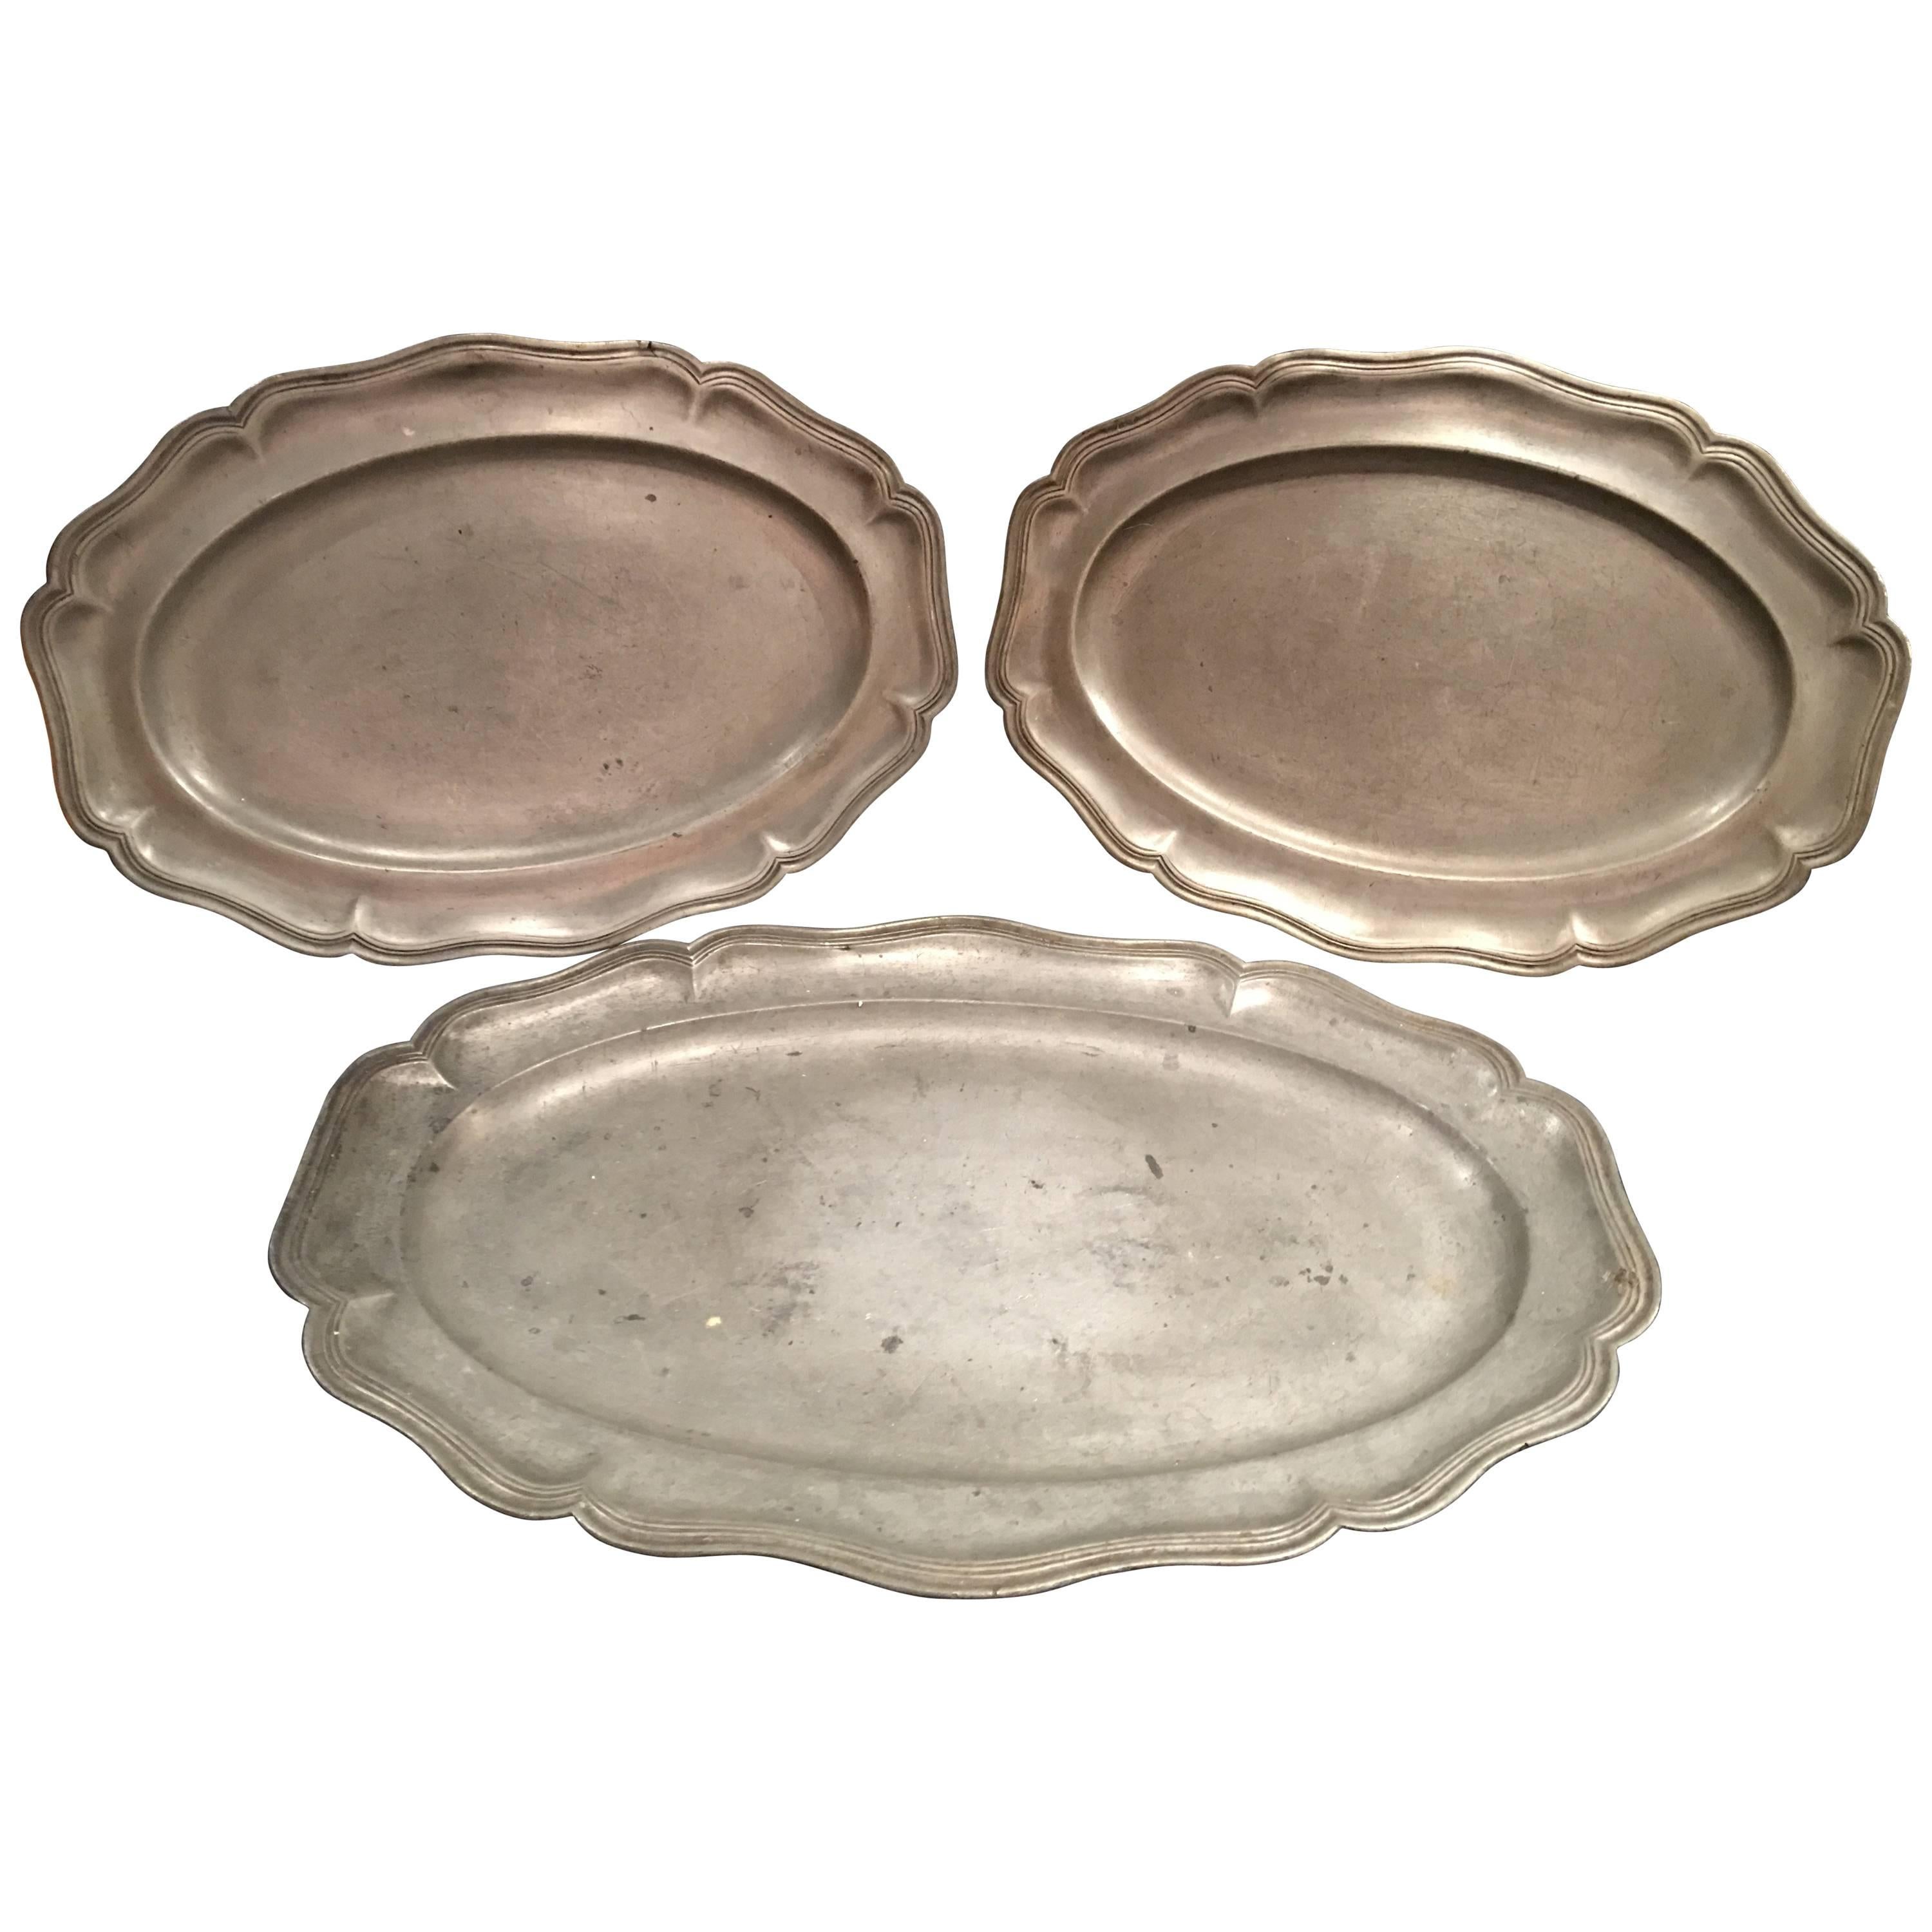 Set of Three English Pewter Serving Platters or Dishes, 19th Century